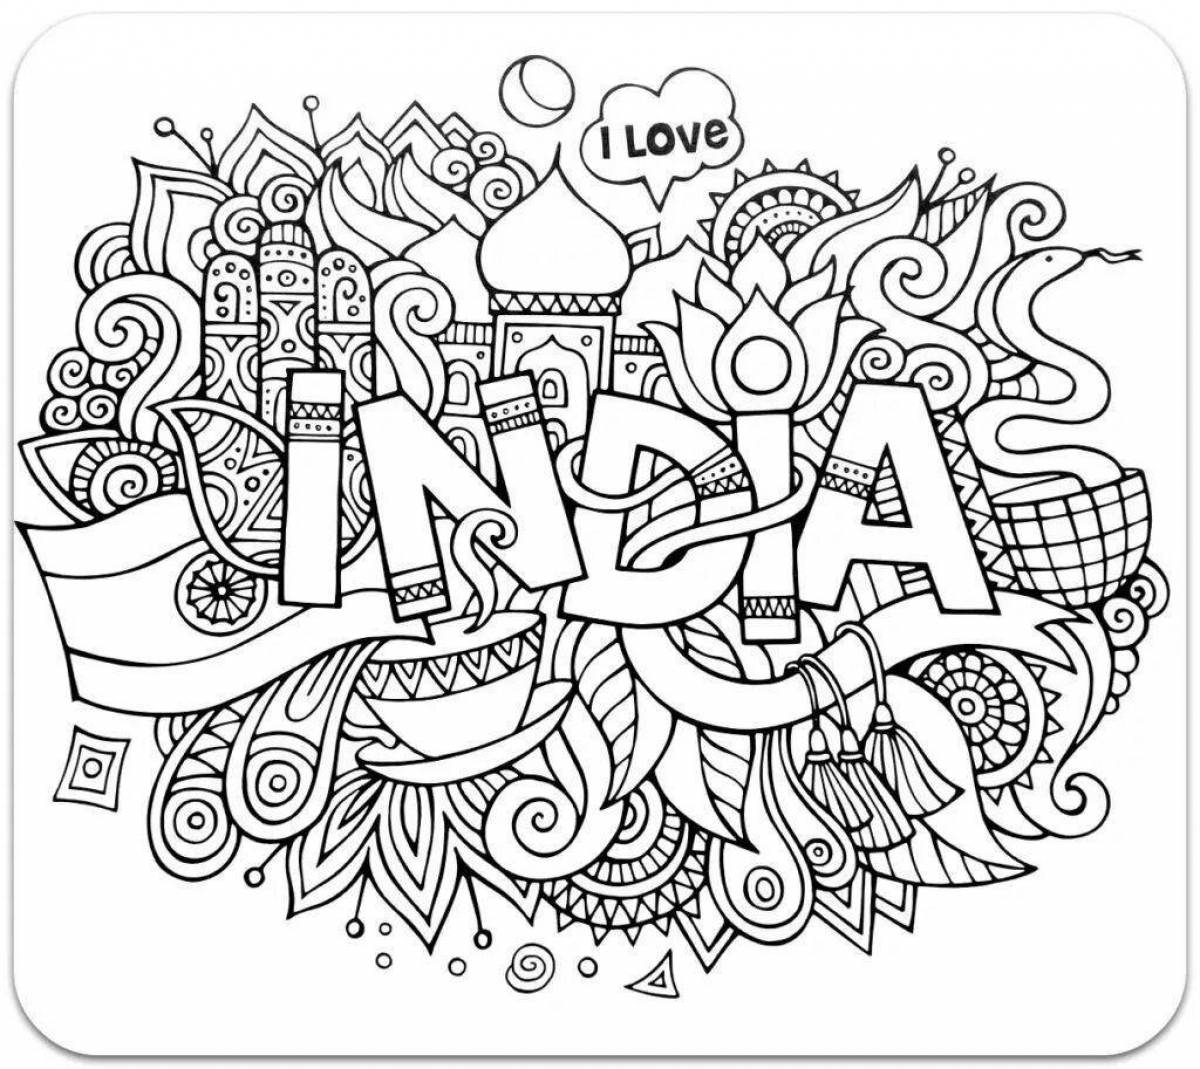 Adorable anti-stress coloring book for teenagers